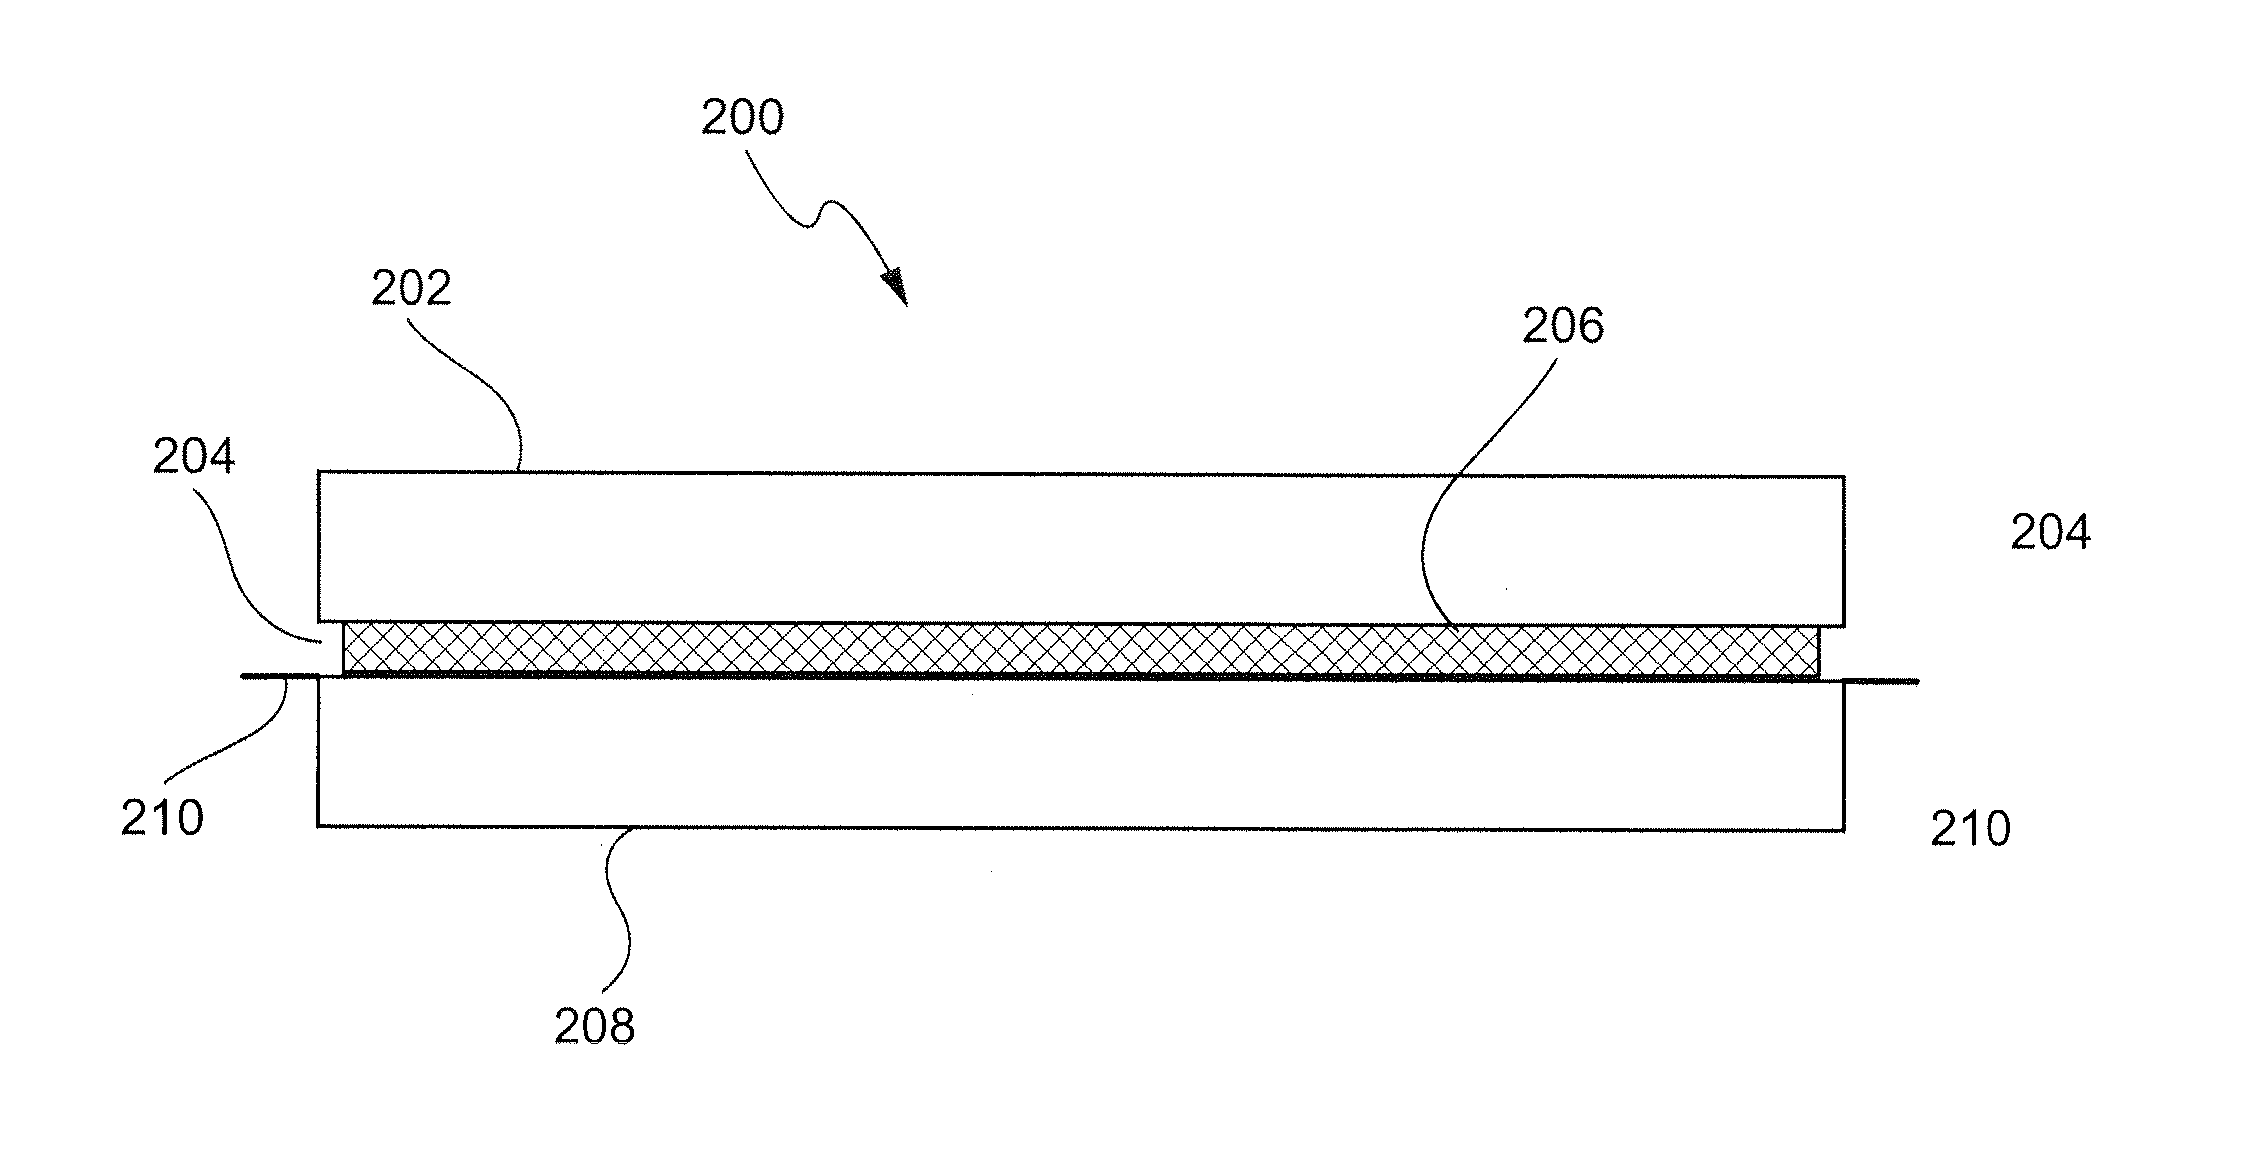 Photovoltaic modules for use in vehicle roofs, and/or methods of making the same